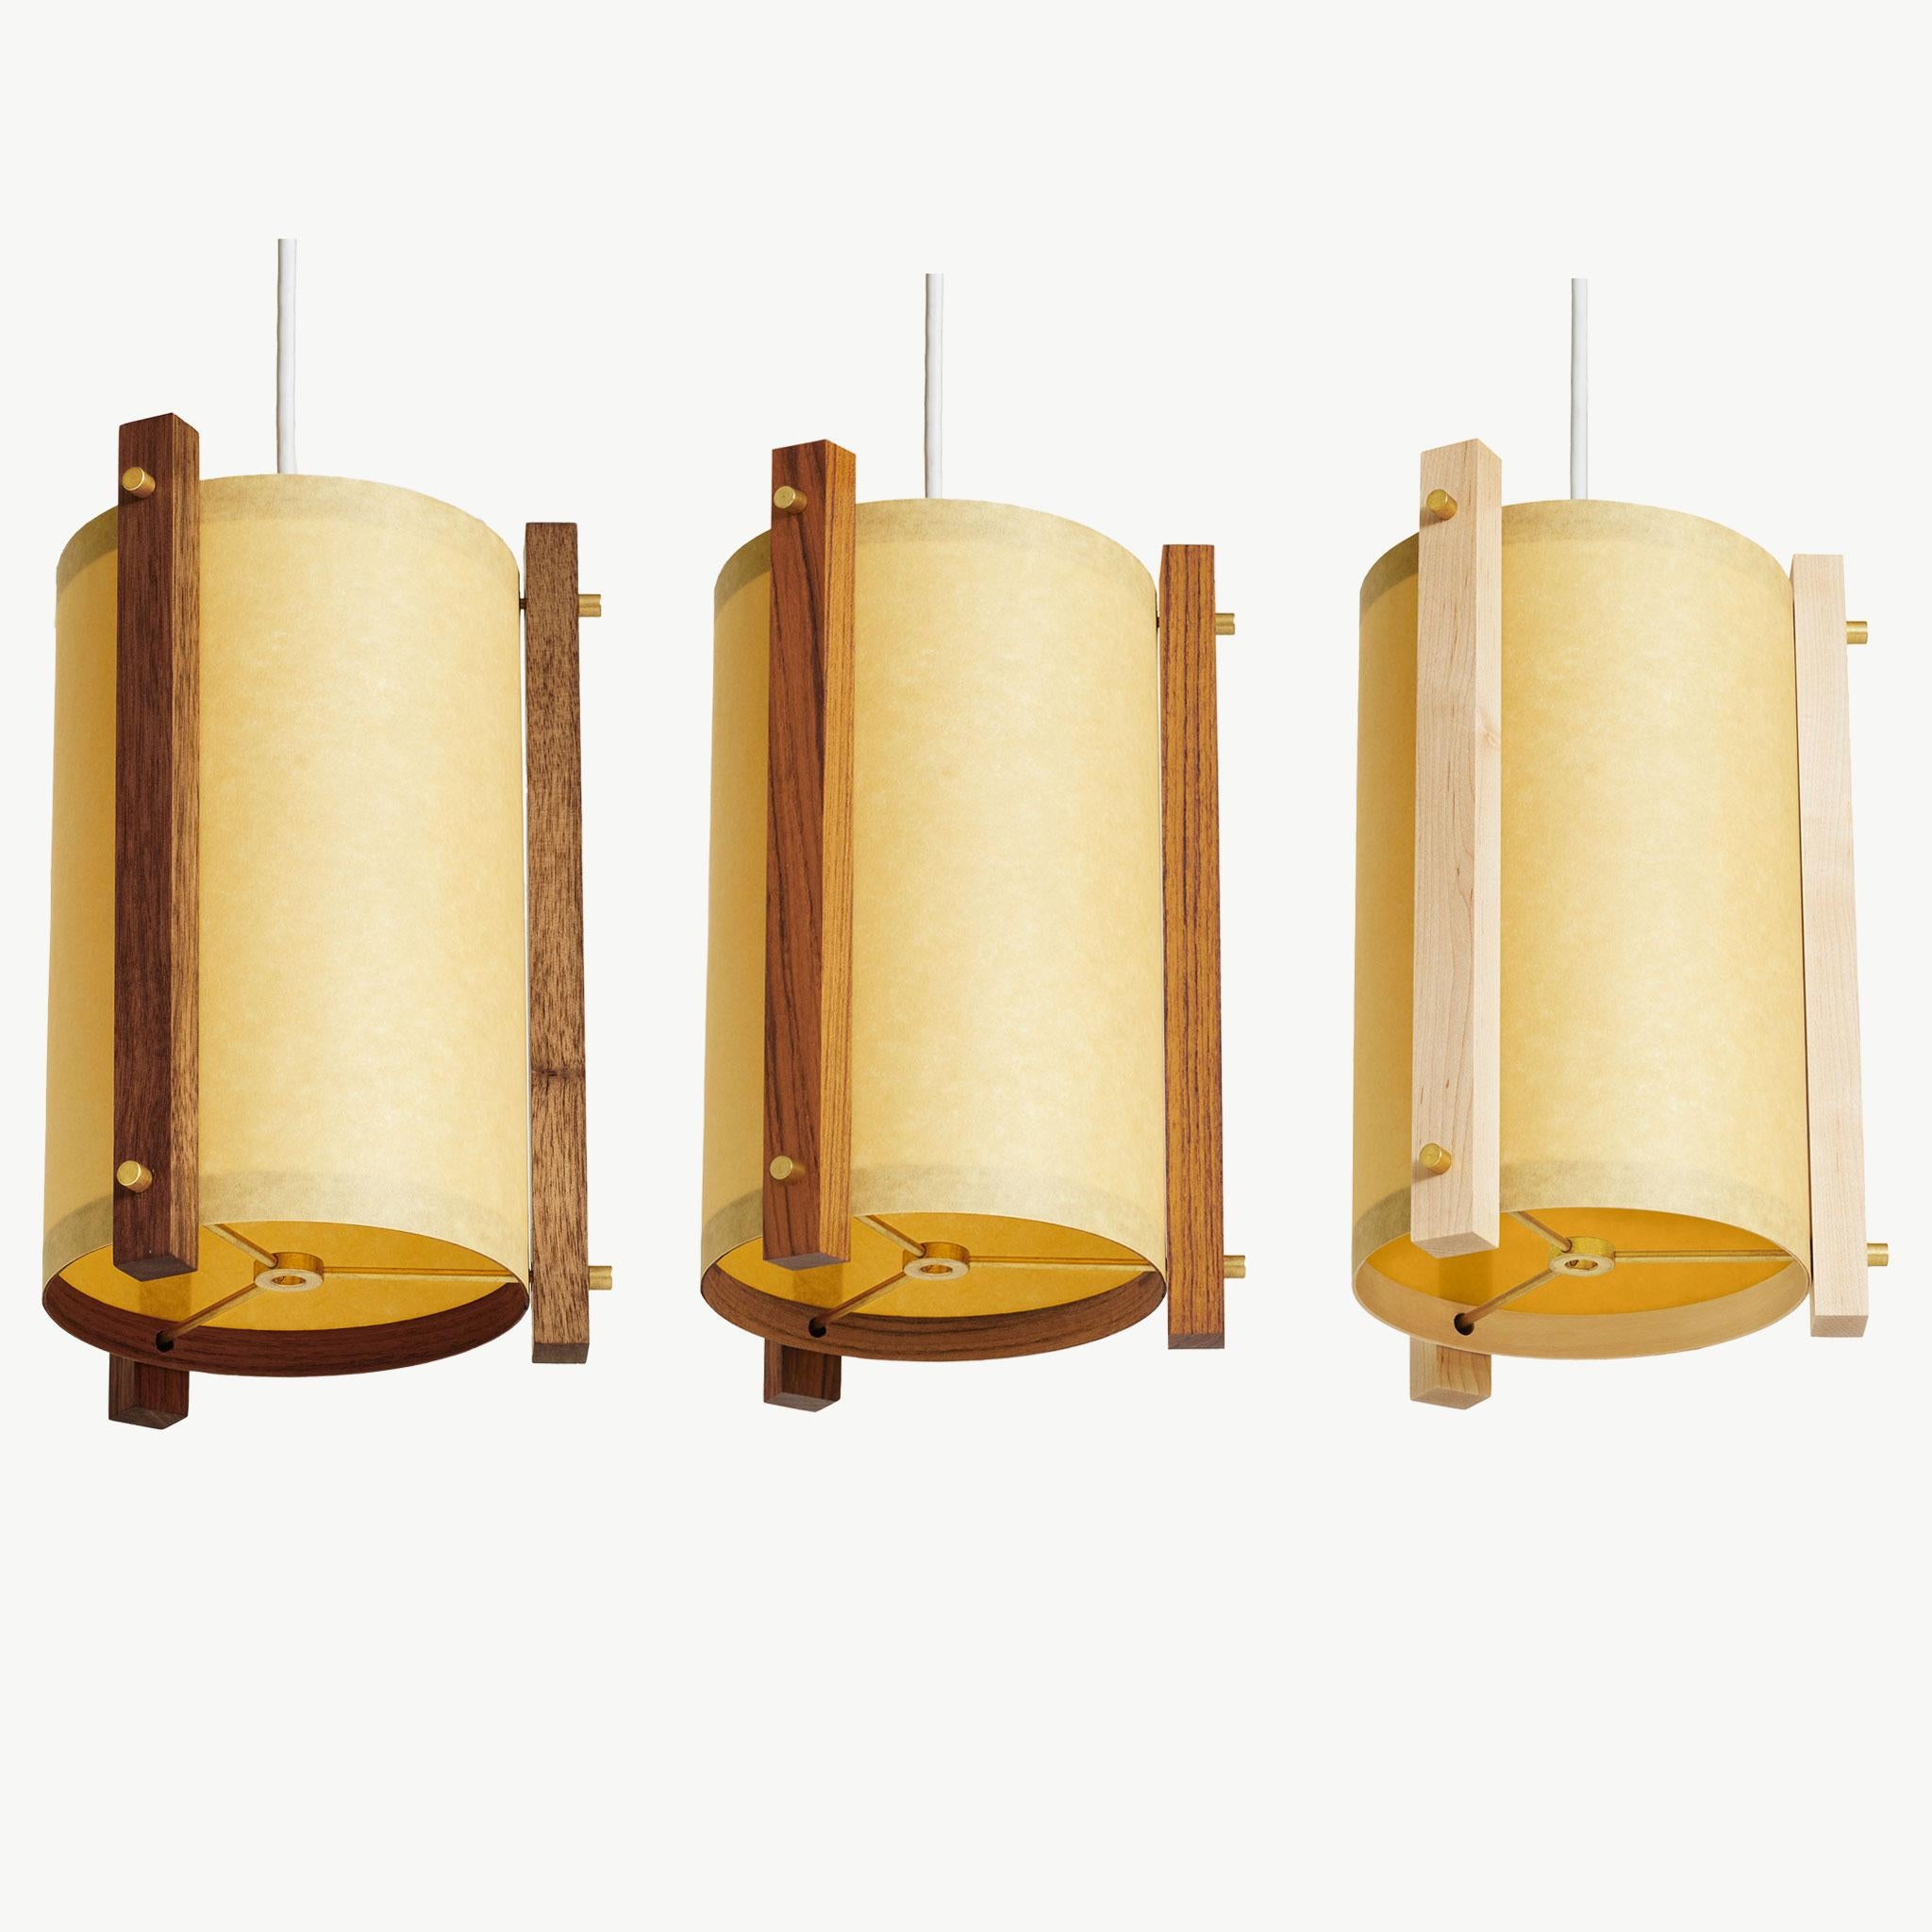 Japanese inspired mid-century white Teak and Brass Pendant Lamp - small For Sale 1